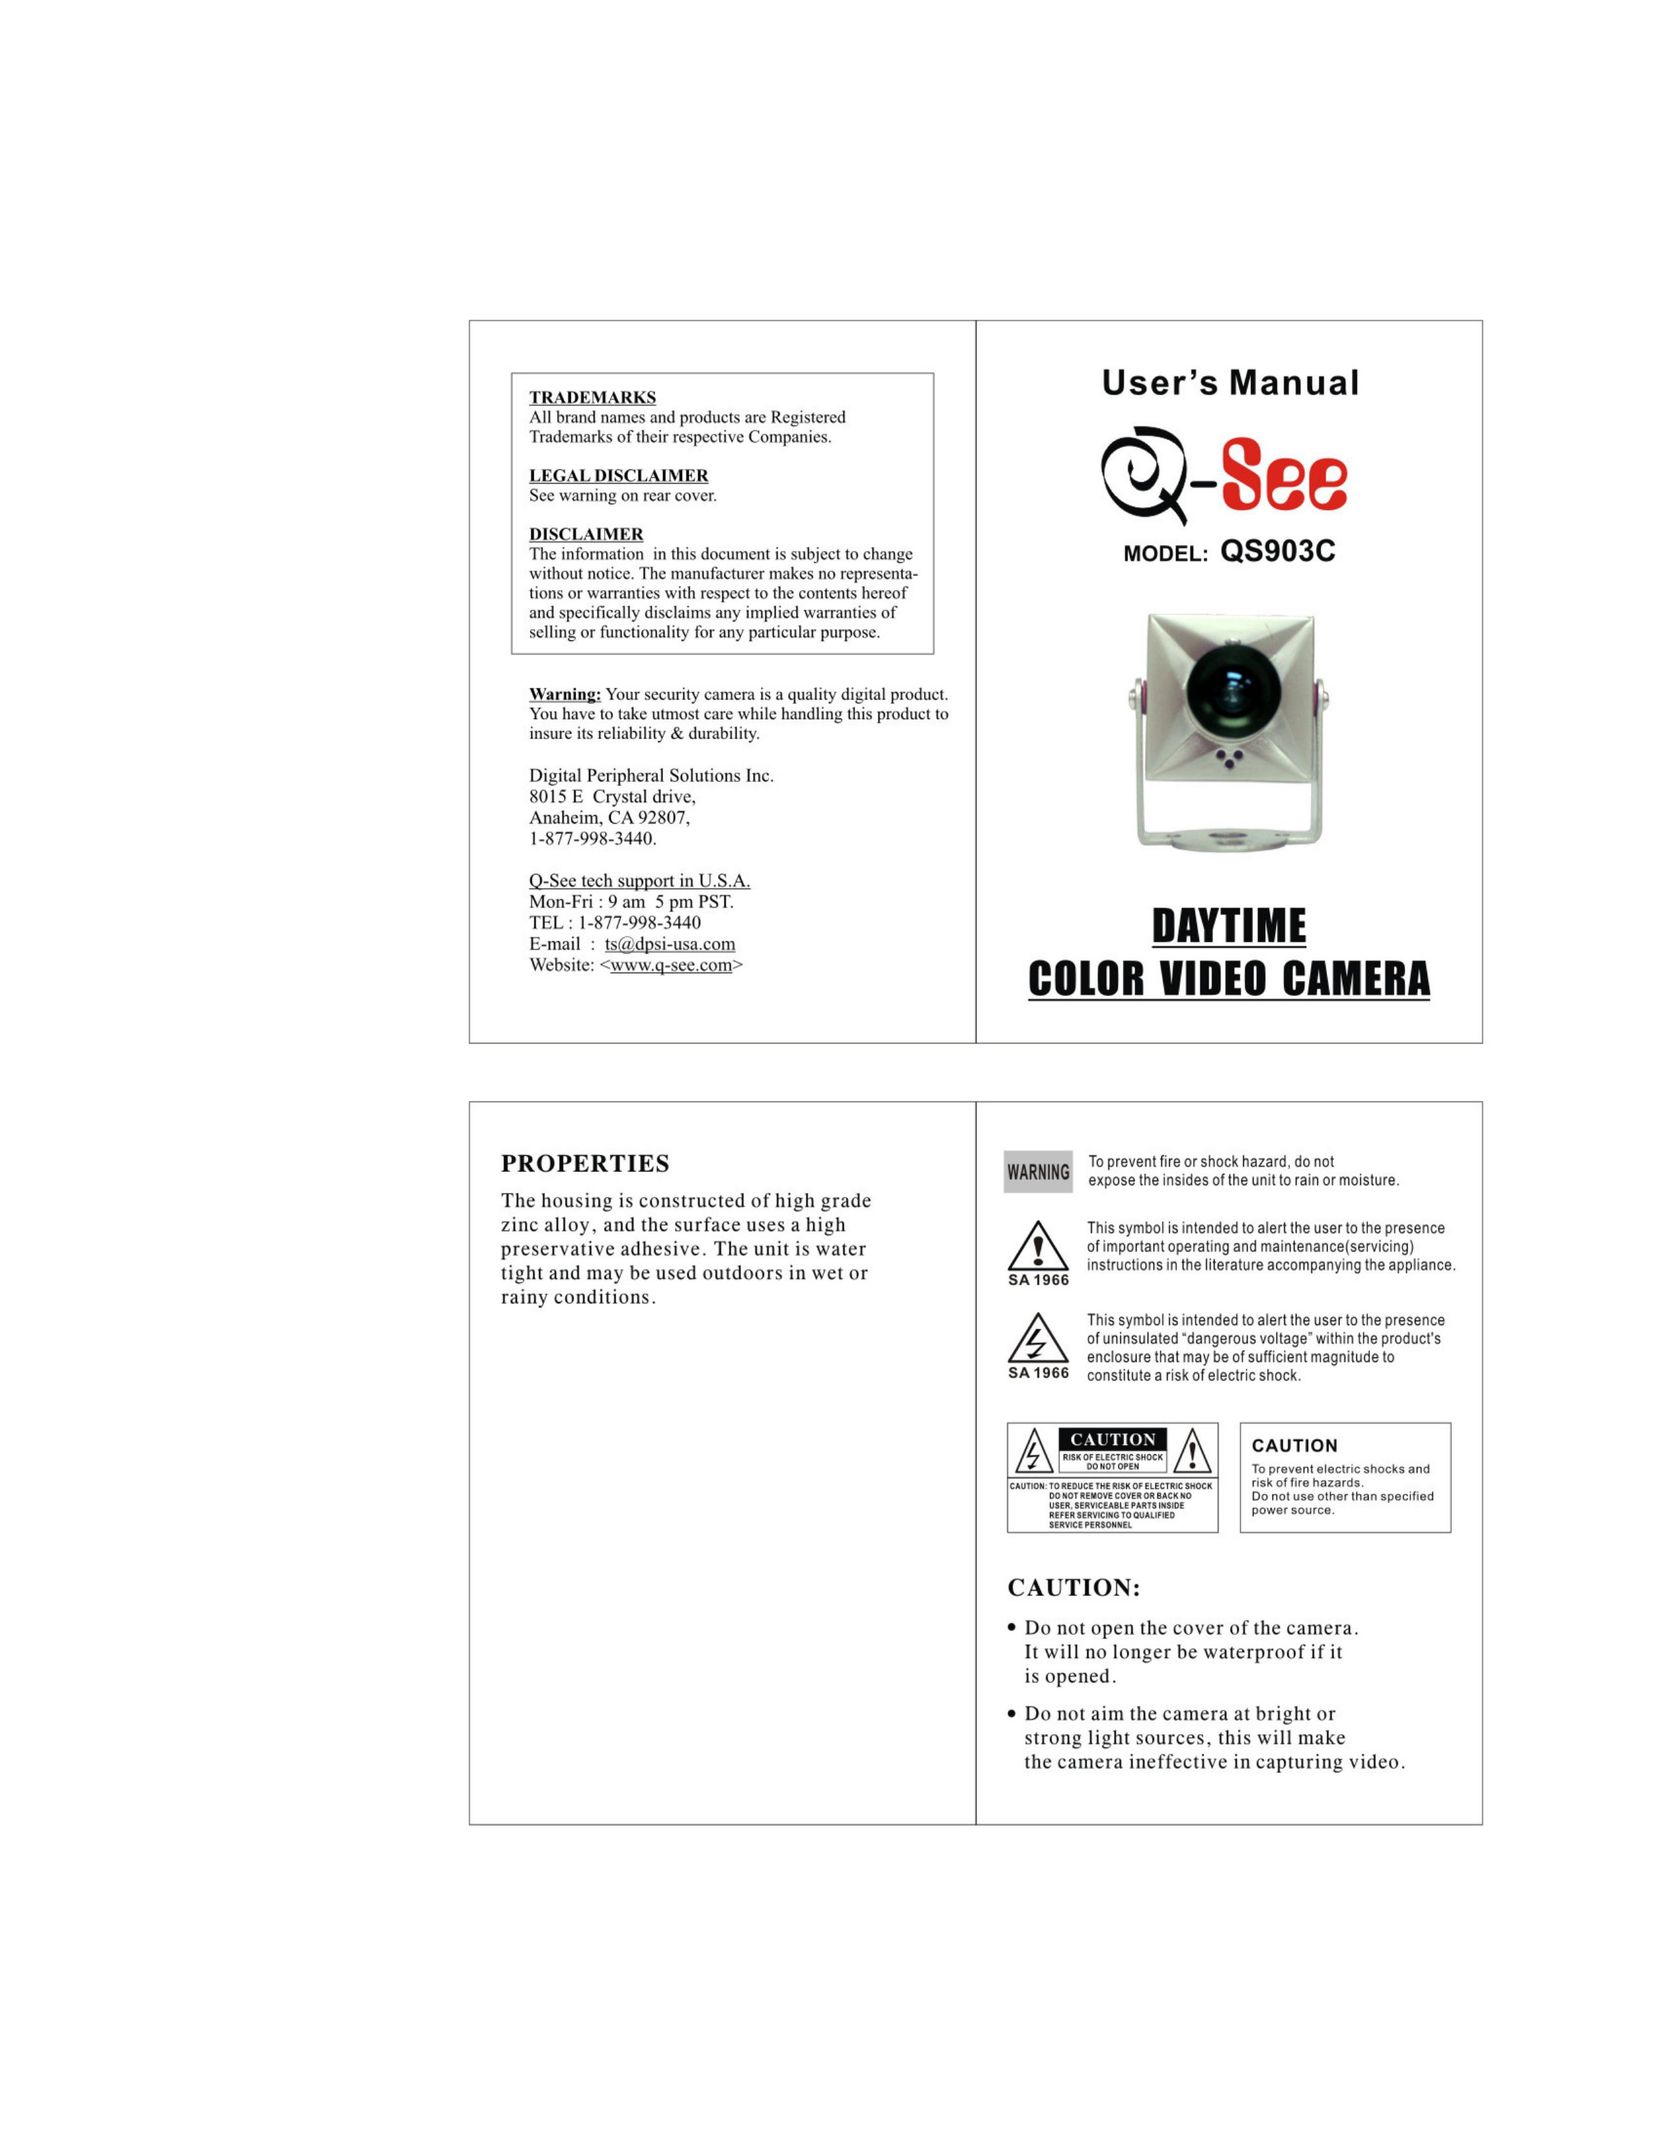 Q-See Qs903c Home Security System User Manual